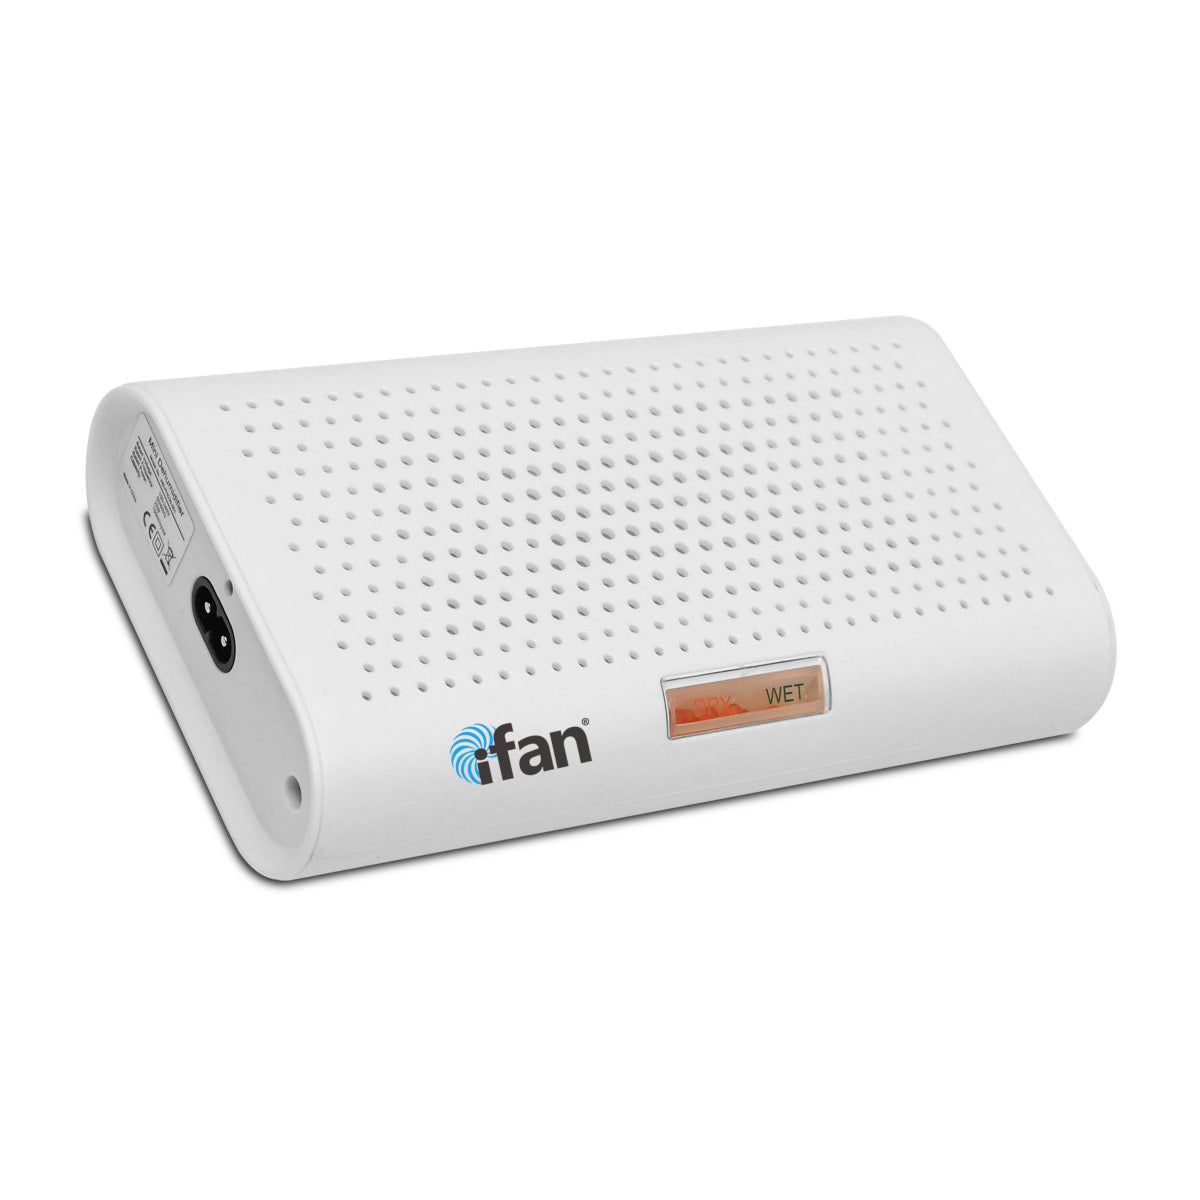 iFan Thirsty Hippo Dehumidifier, Dehumidifier, Rechargeable Moisture Absorber | Reusable (IF3251)